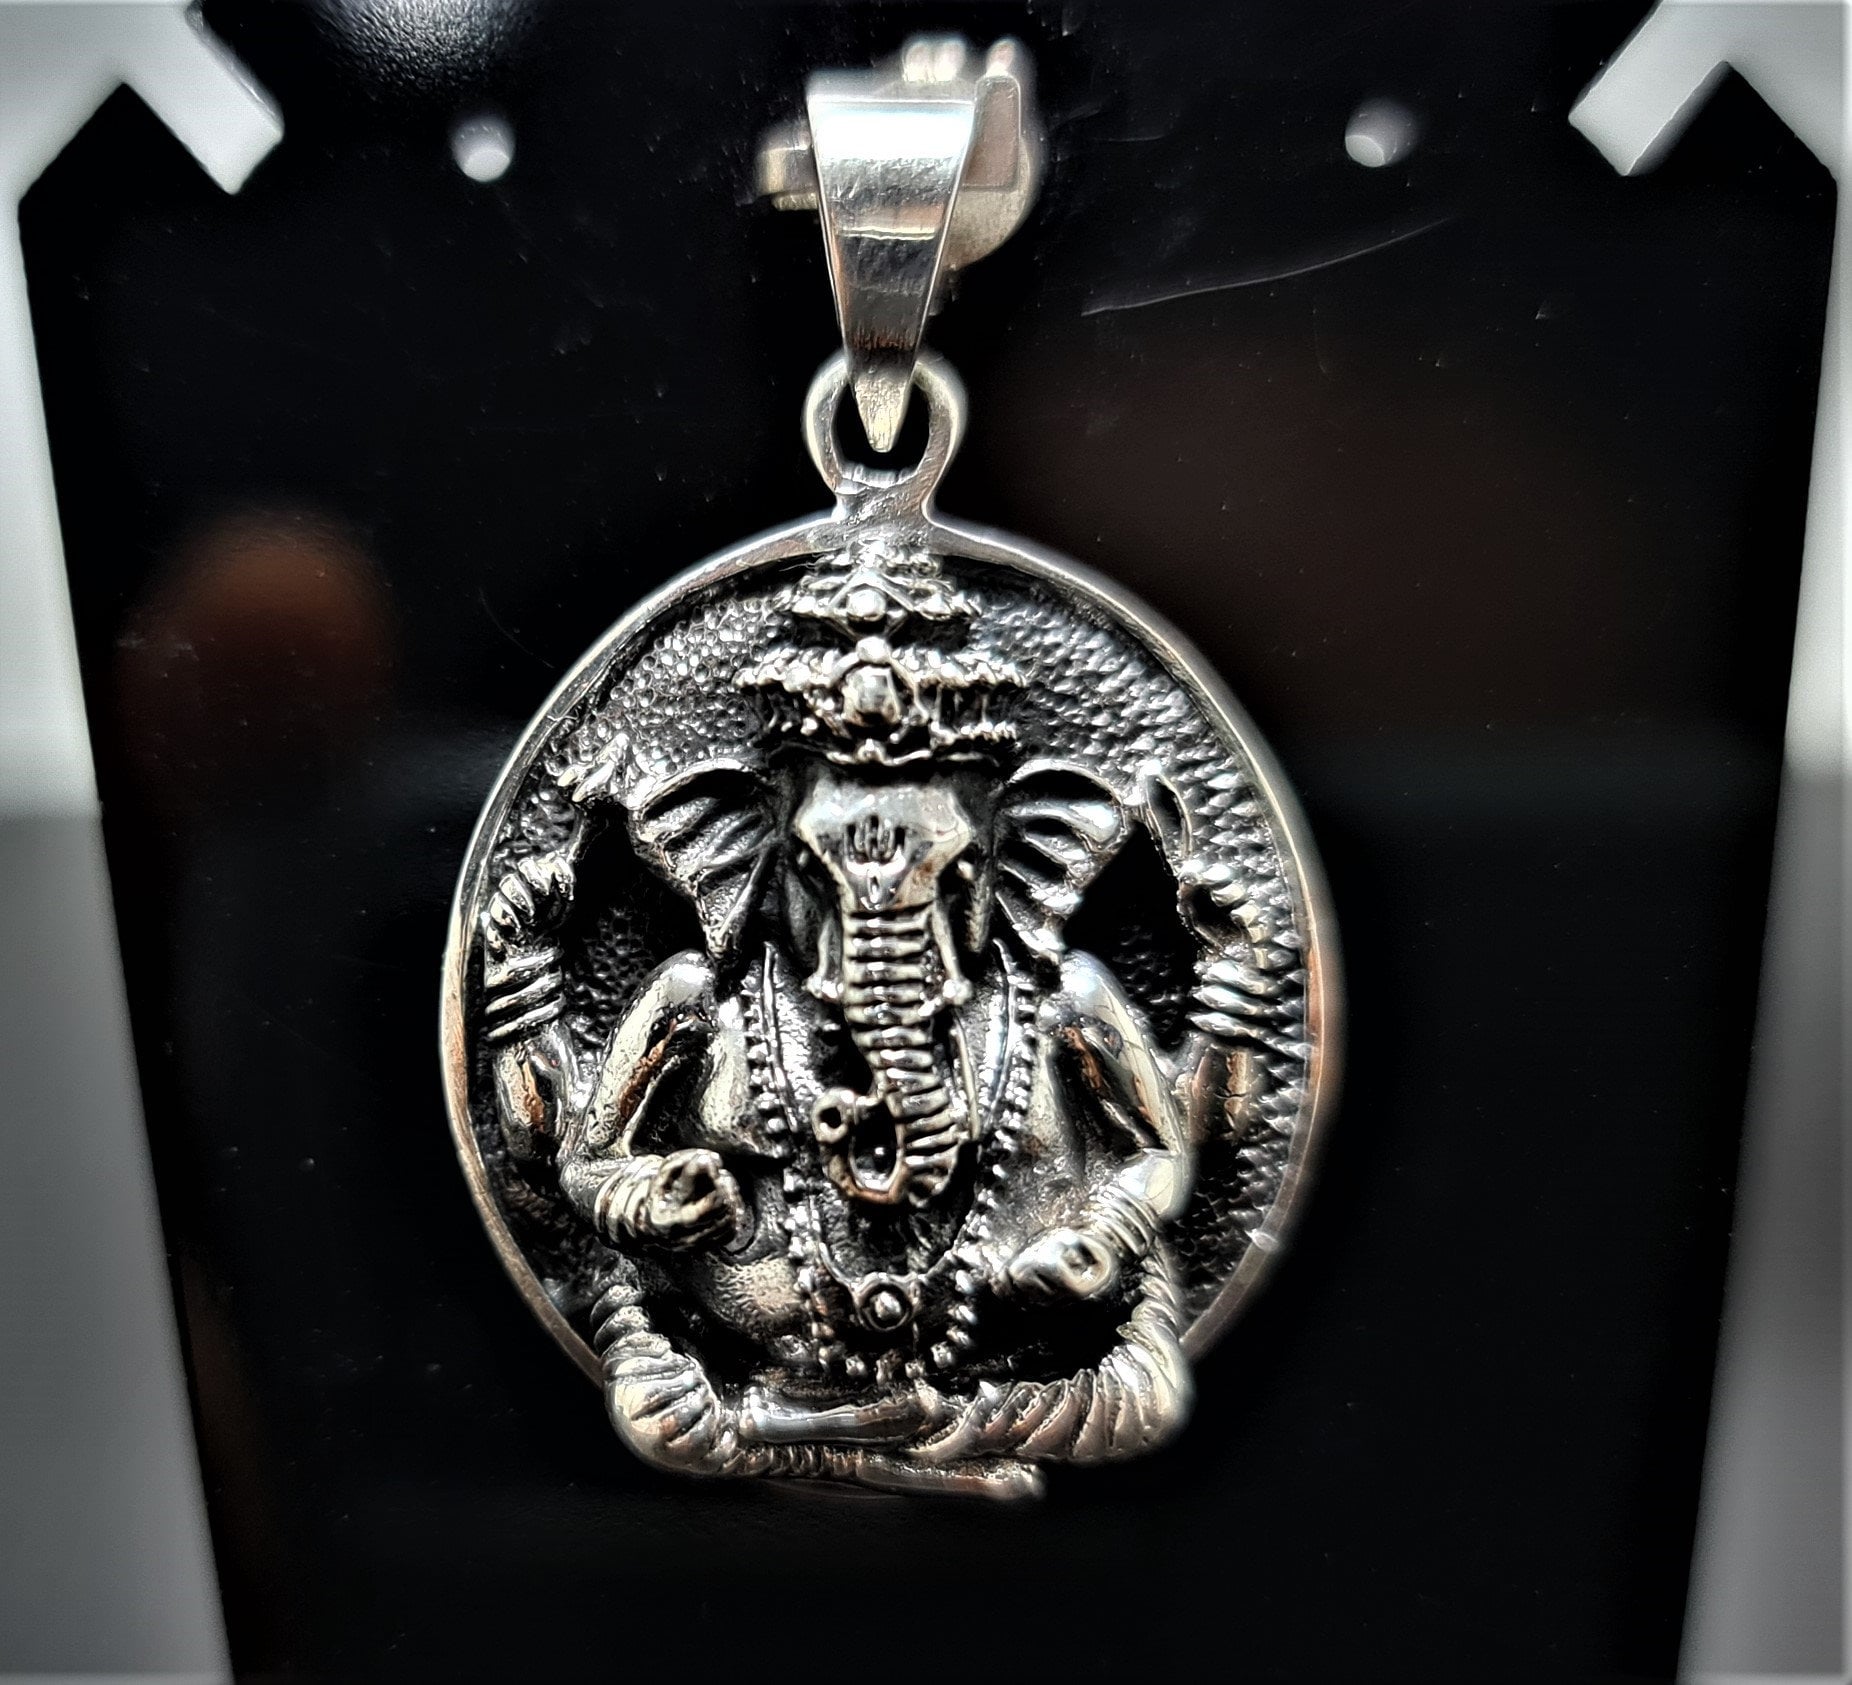 Grand carved onyx & 925 sterling silver Ganesha the Elephant headed pendant  god new beginnings hope positivity wealth good fortune life